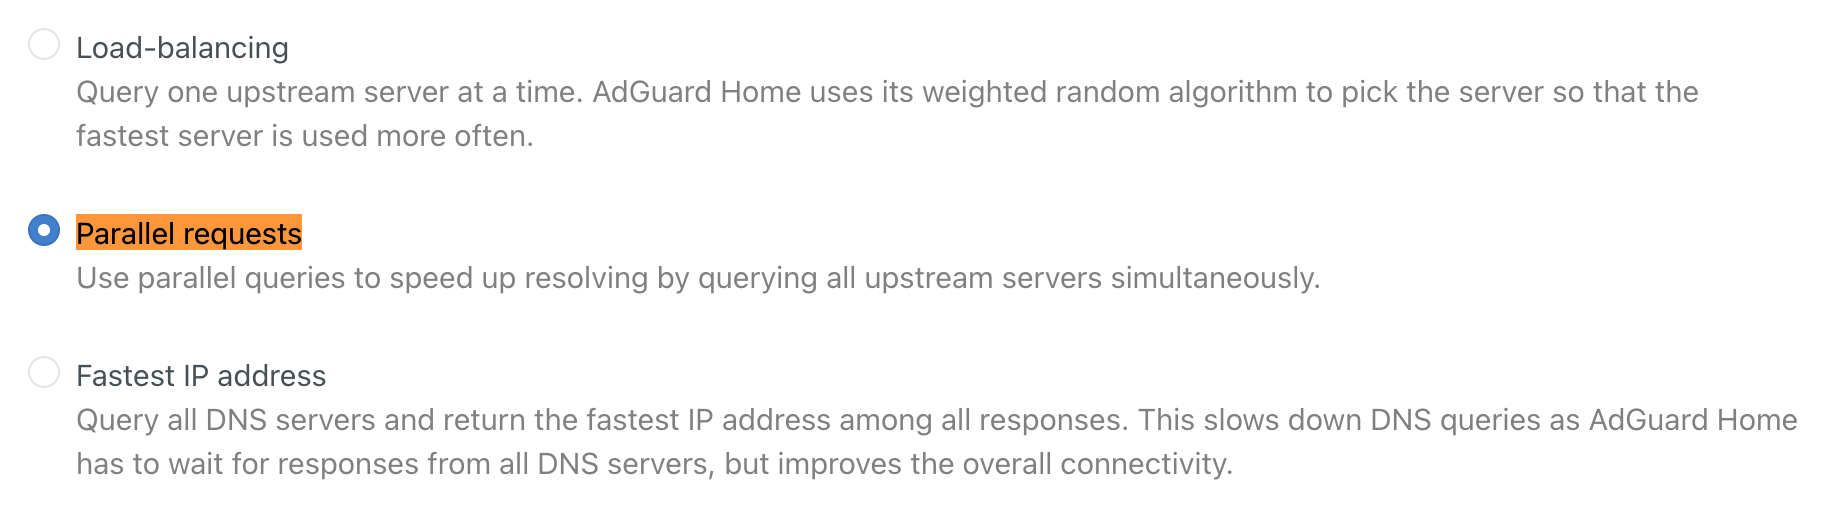 adguard home parallel requests